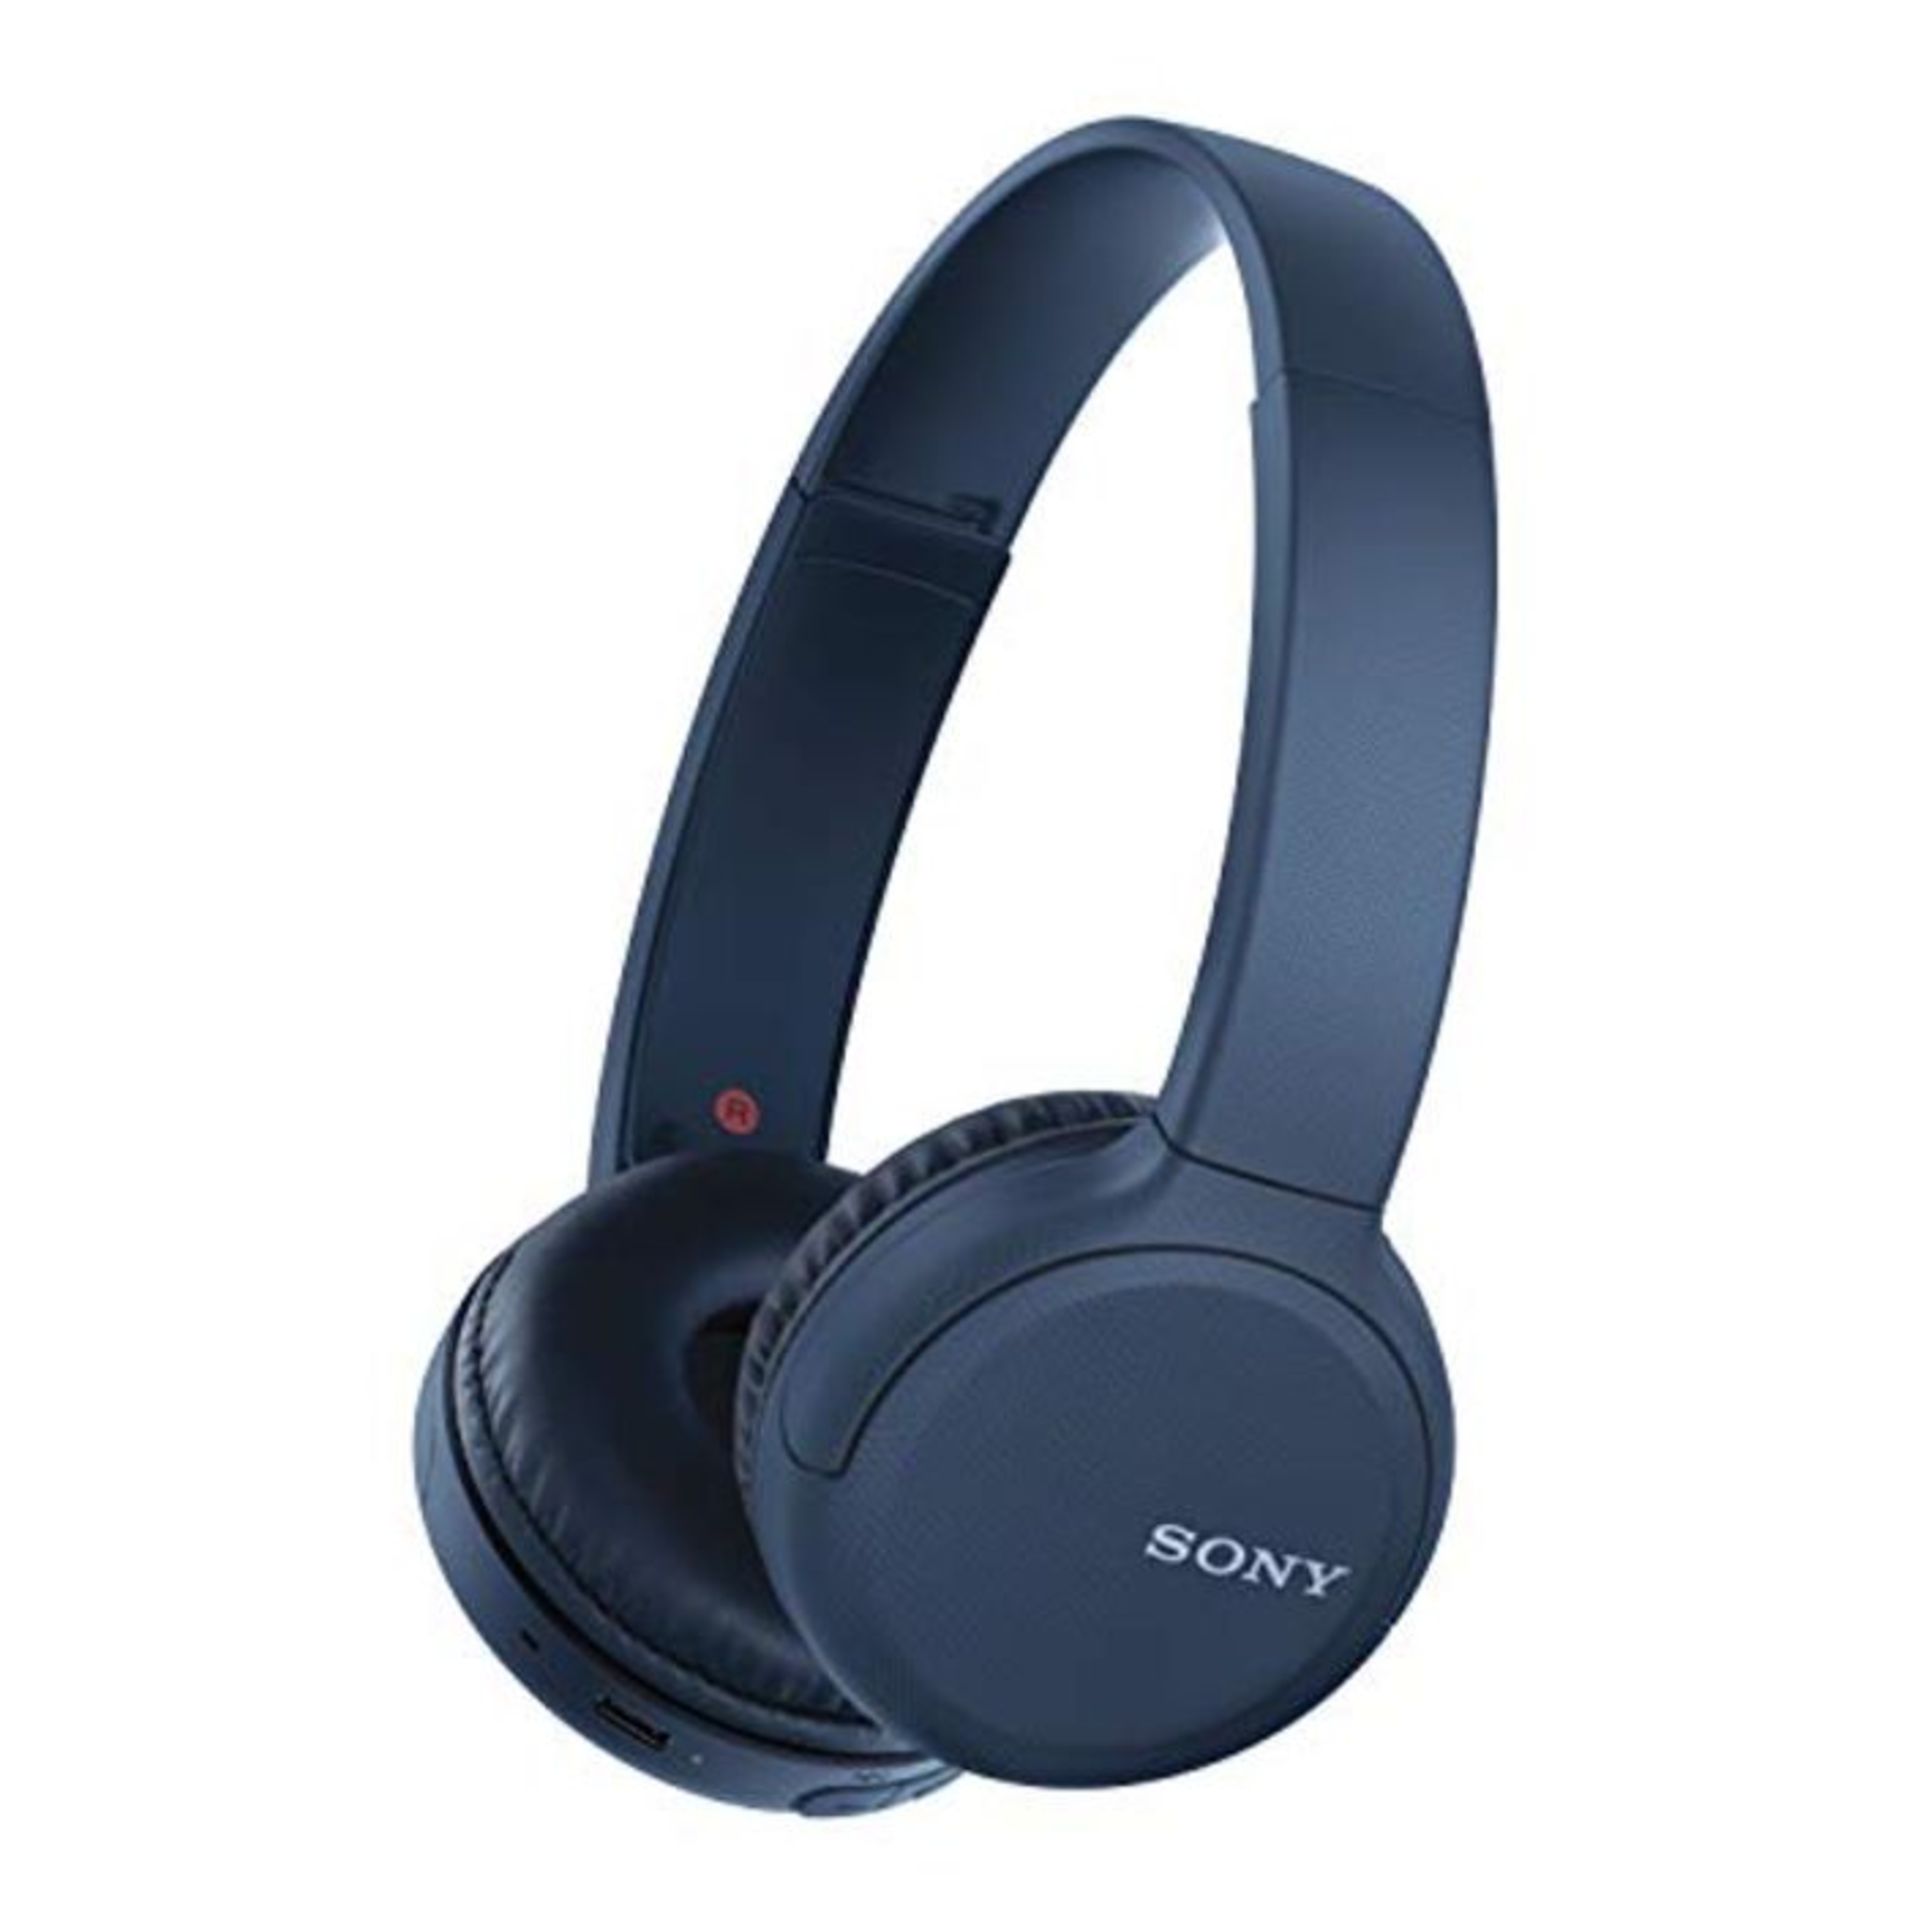 [CRACKED] Sony WH-CH510 Wireless Bluetooth Headphones with Mic, 35 Hours Battery Life